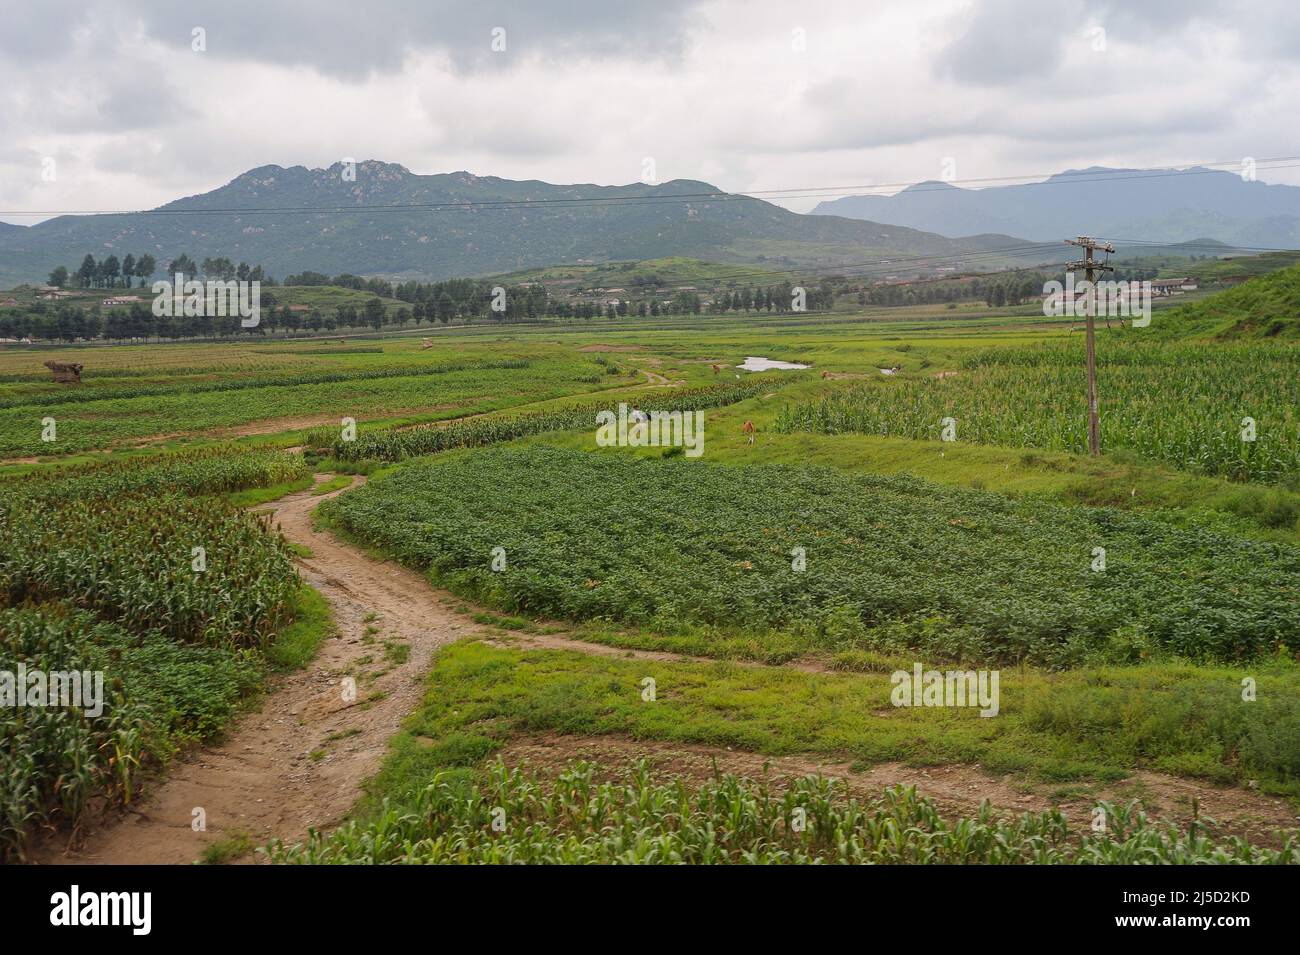 15.08.2012, North Korea, Asia - A rural scene in the province with  agricultural land during the